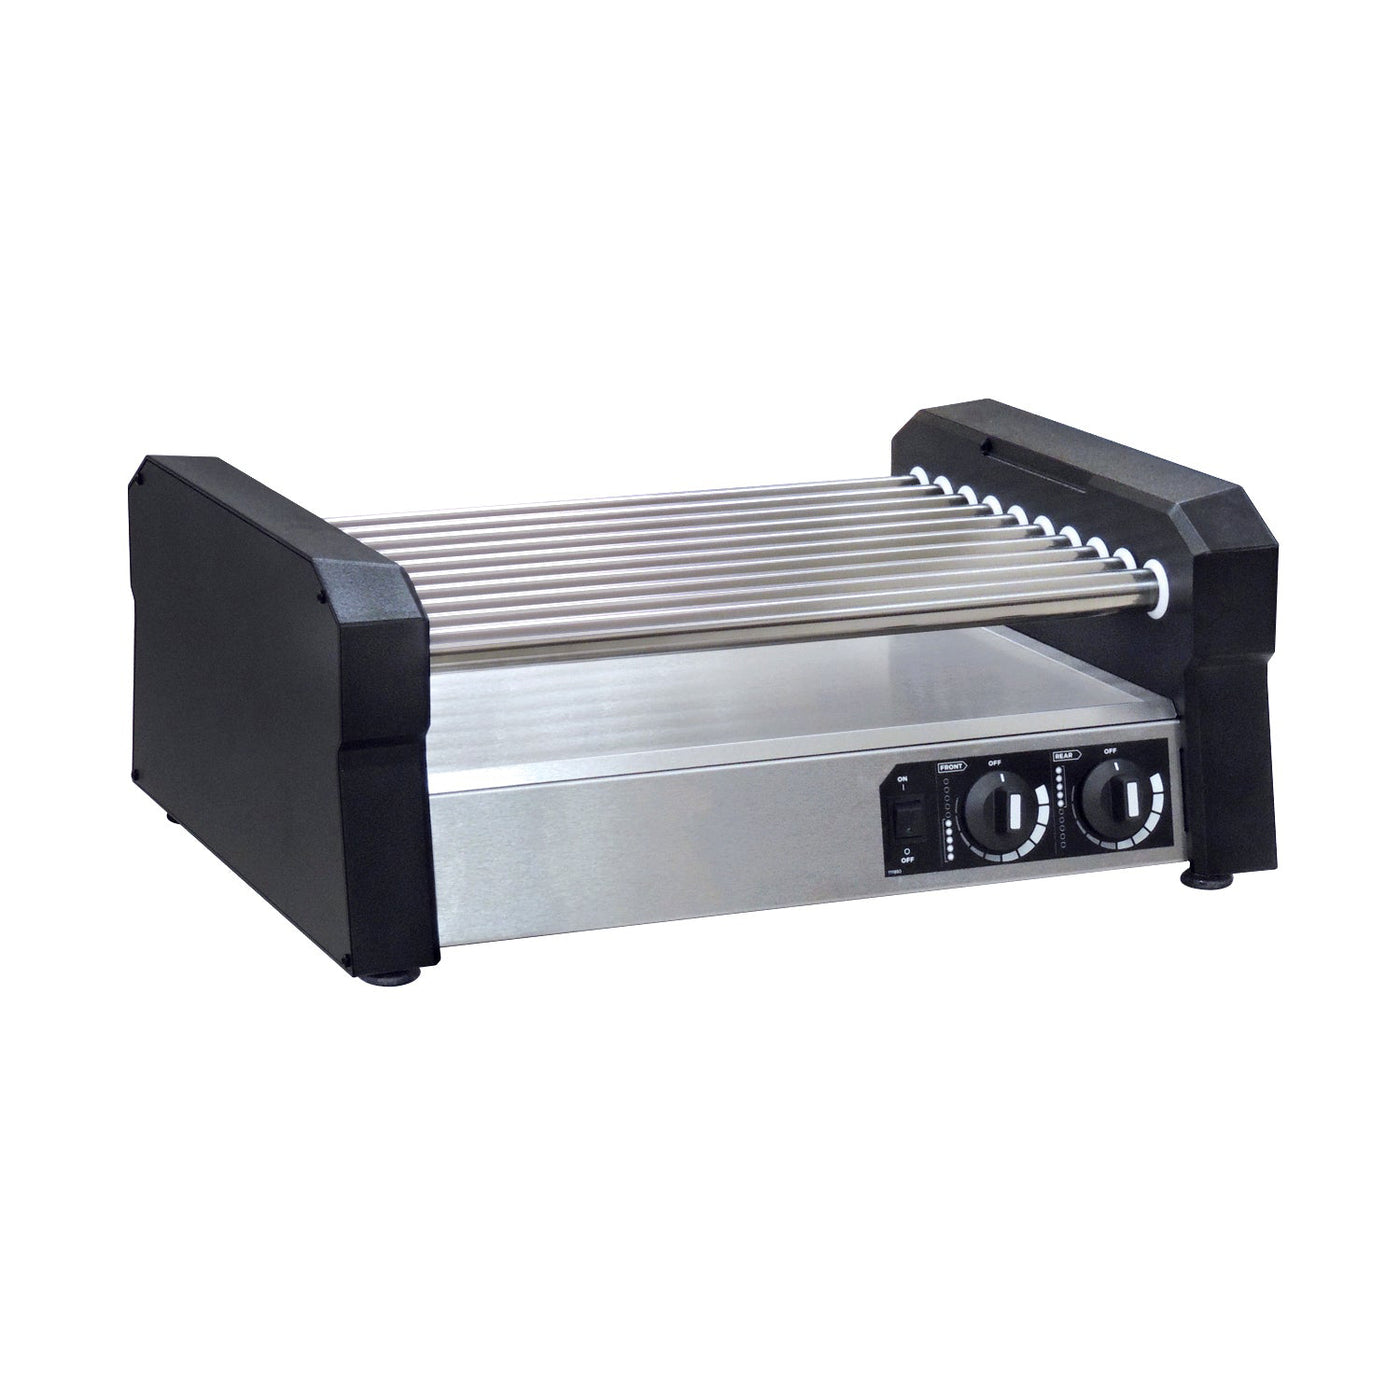 pence Janice Ærlig Hot Dog Roller Grill | Hot Diggity Pro C - Gold Medal #8551-00-000 – Gold  Medal Products Co.